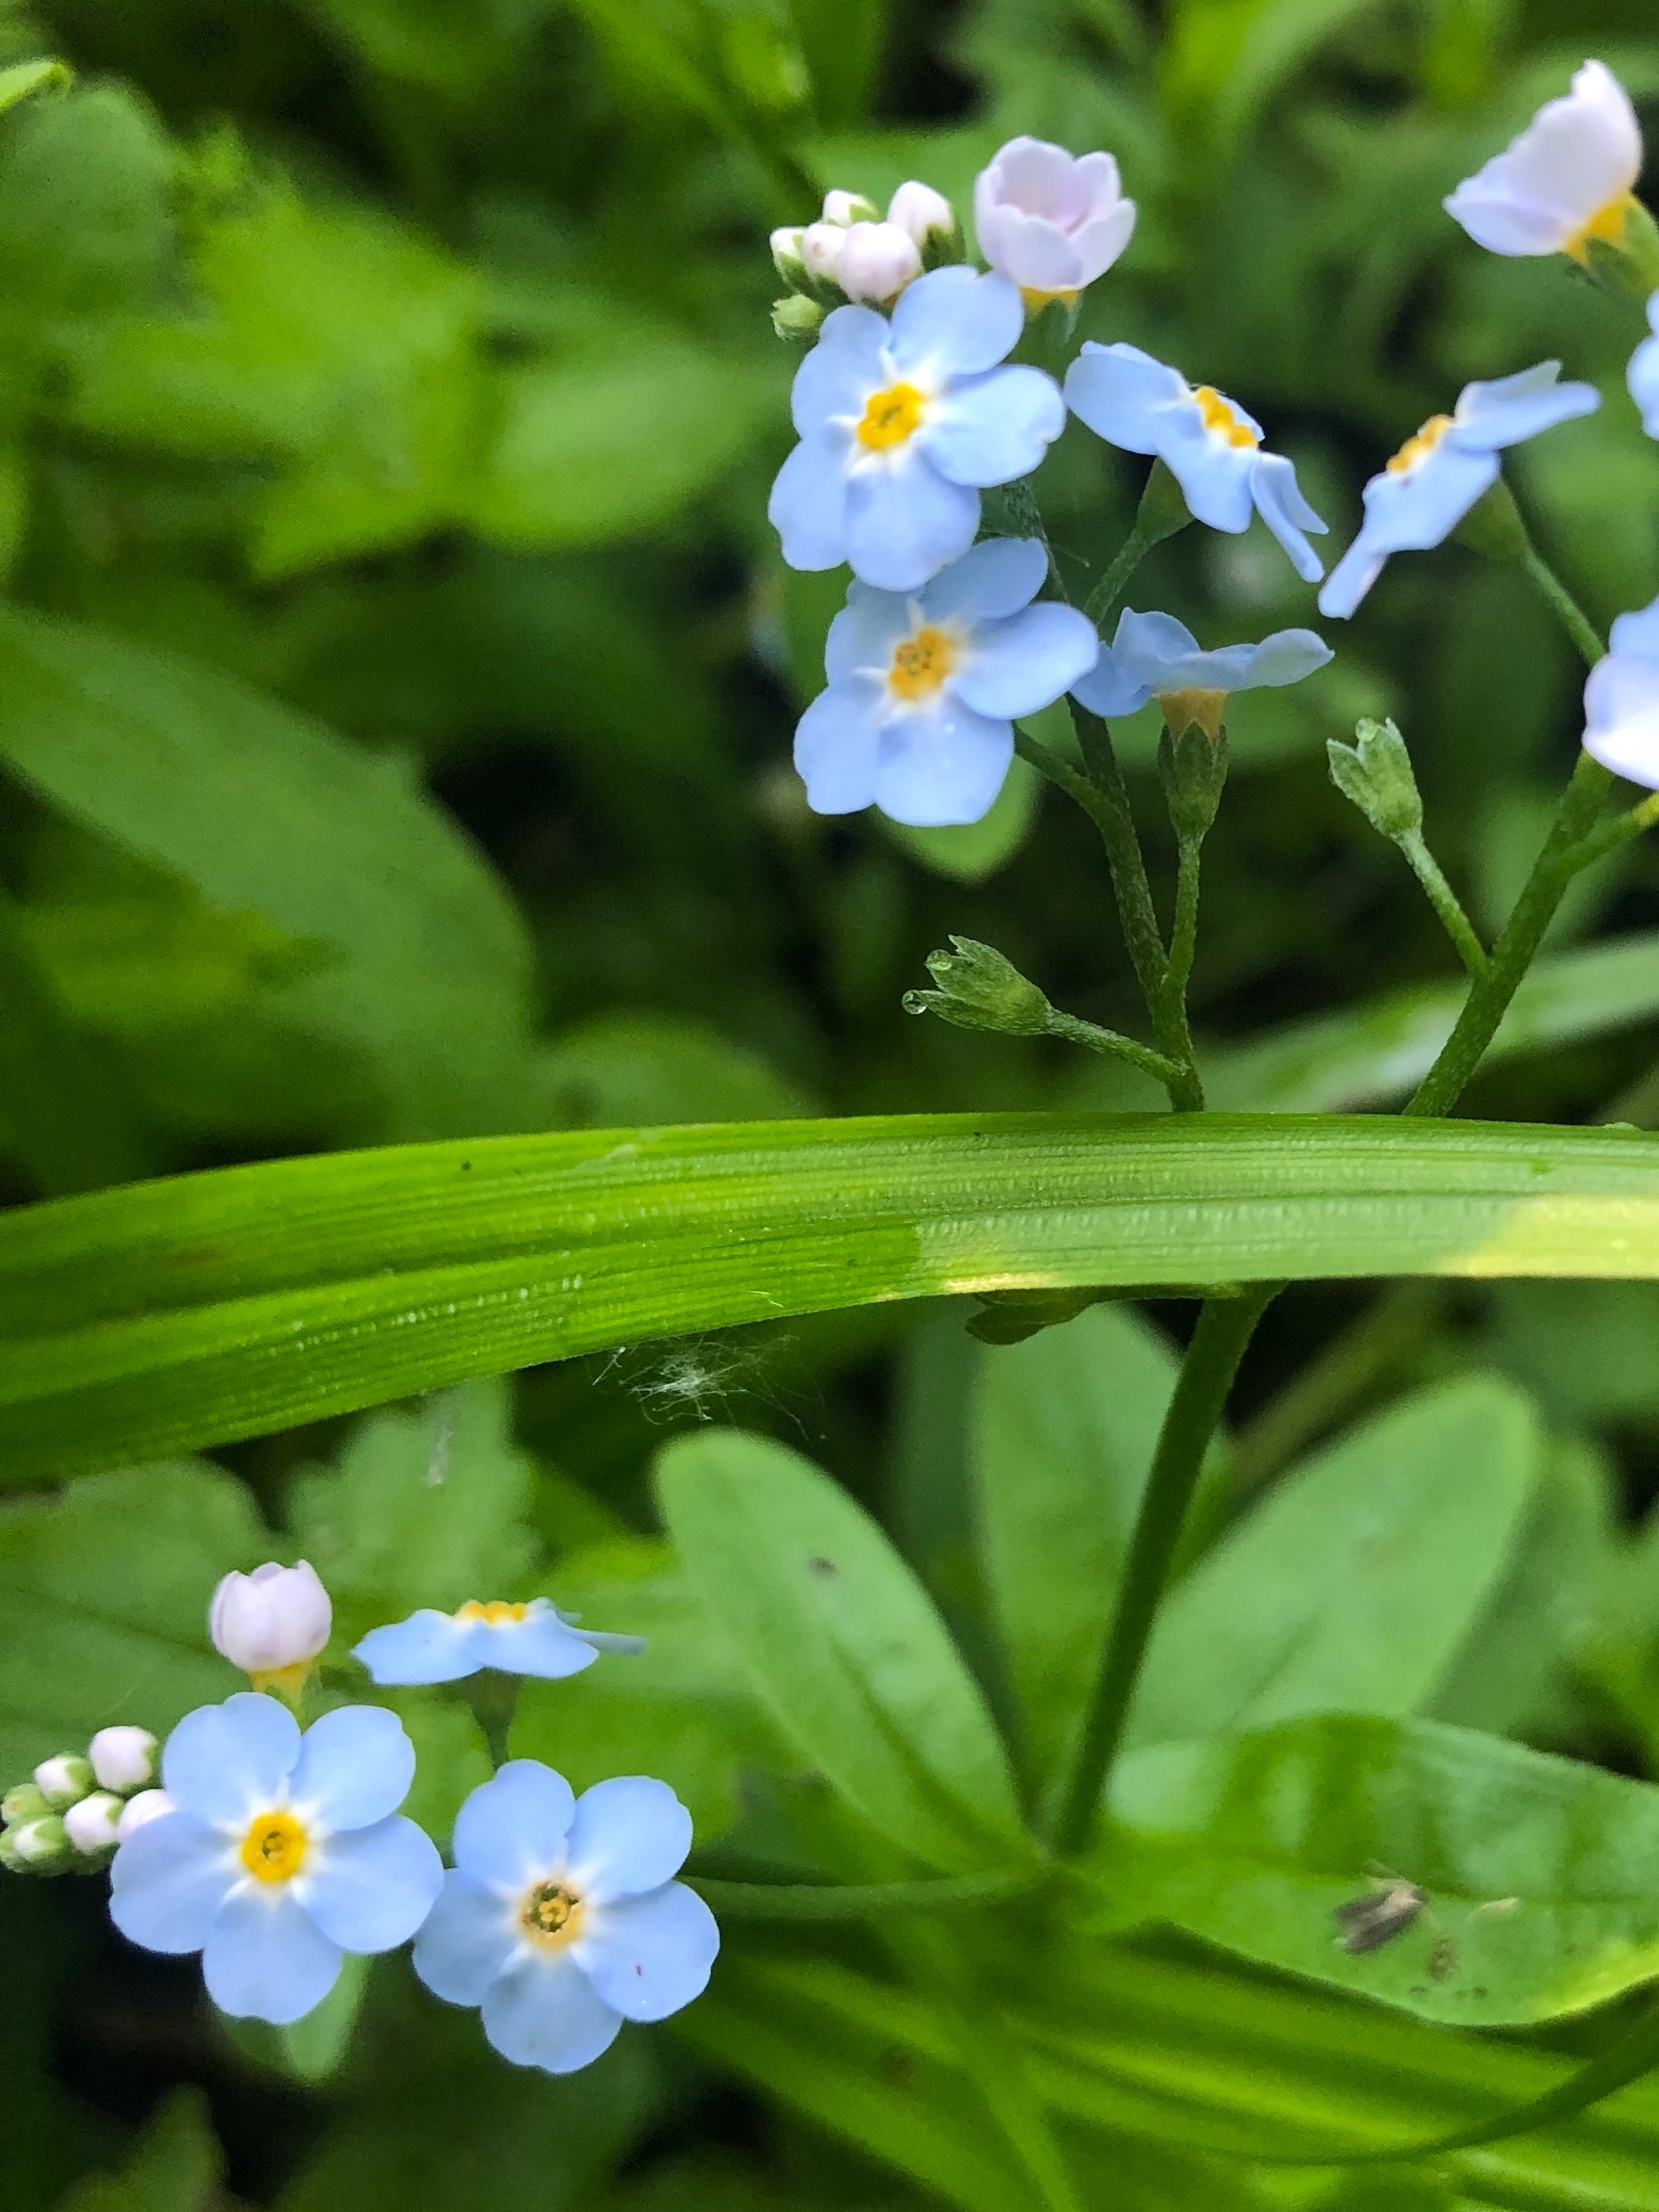 True Forget-me-not near cattails at Pickford Street stormwater outflow into Lake Wingra in Madison, Wisconsin on June 17, 2020.